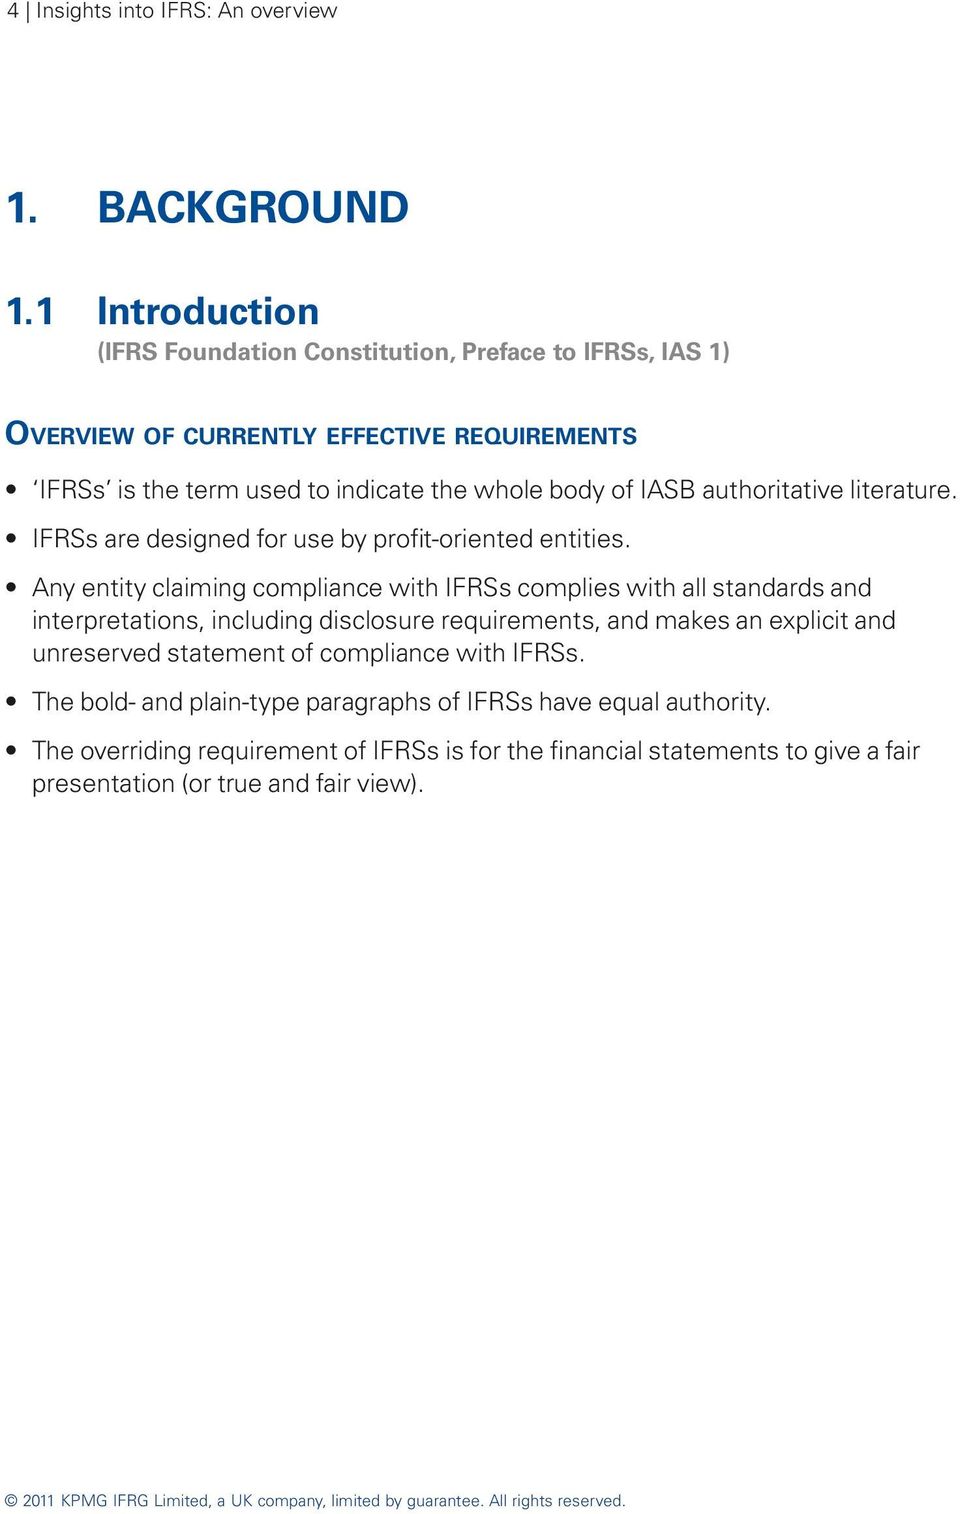 IASB authoritative literature. IFRSs are designed for use by profit-oriented entities.